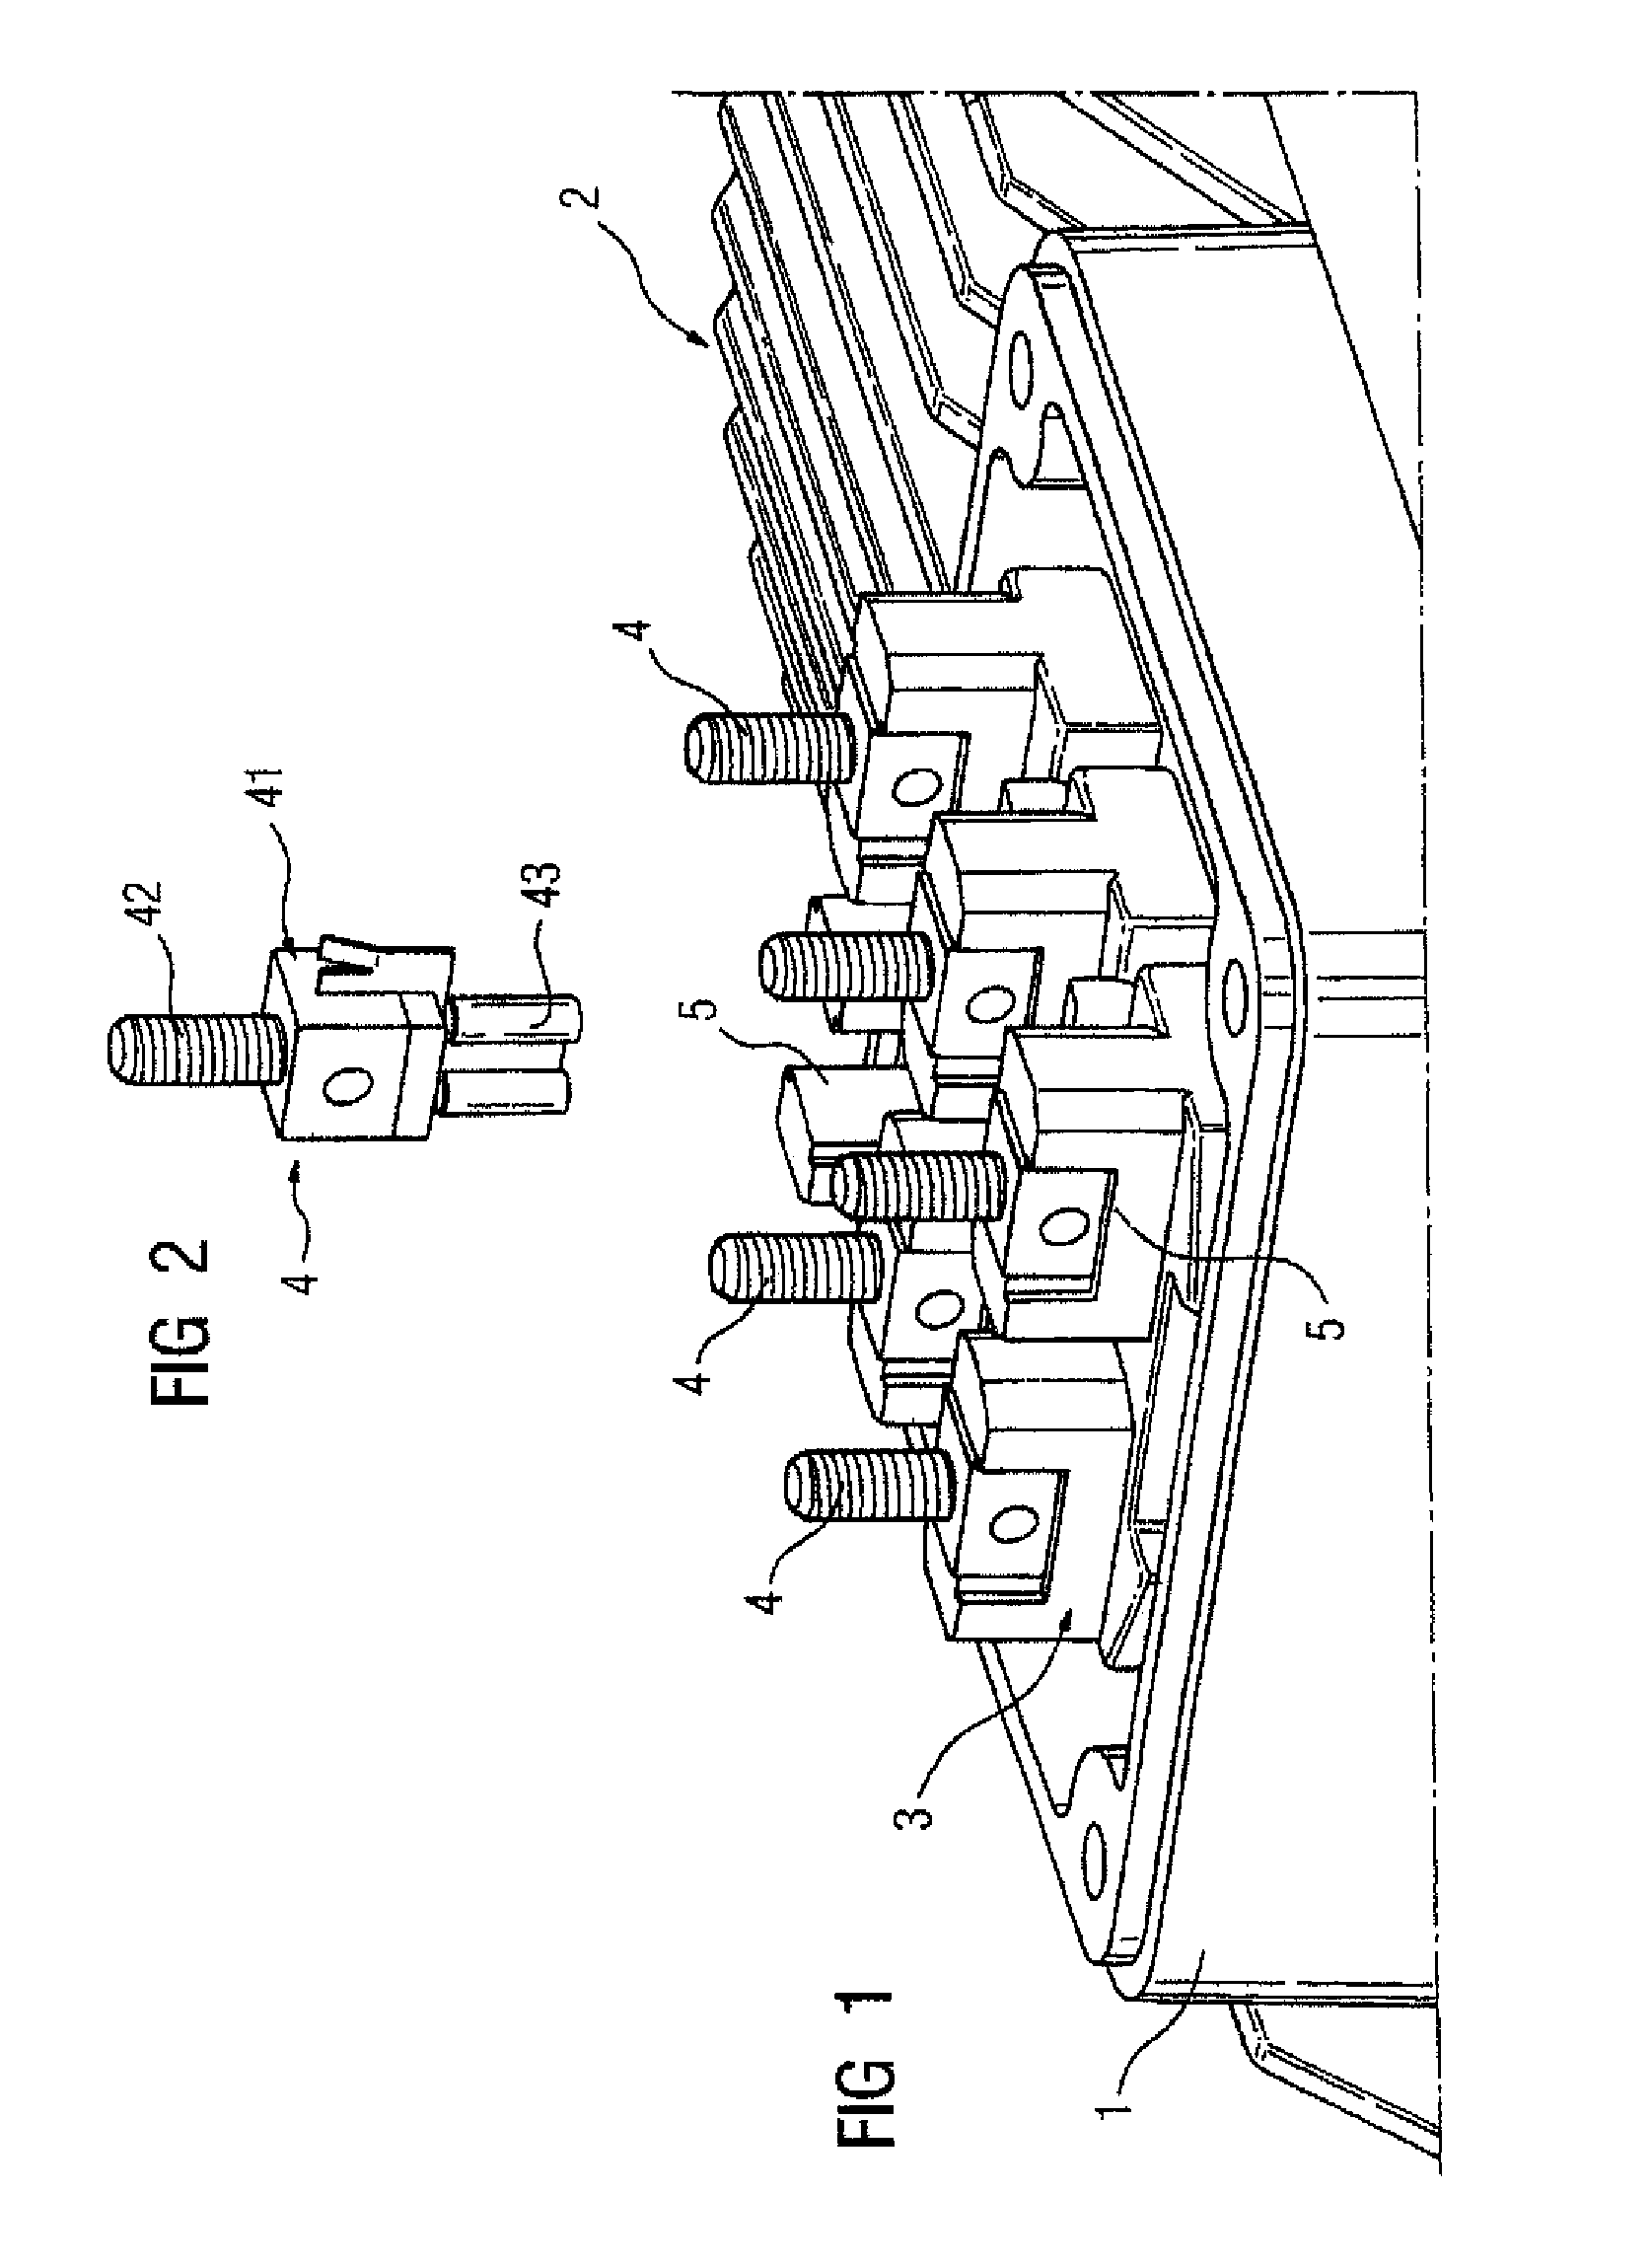 Connection device for an electrical machine